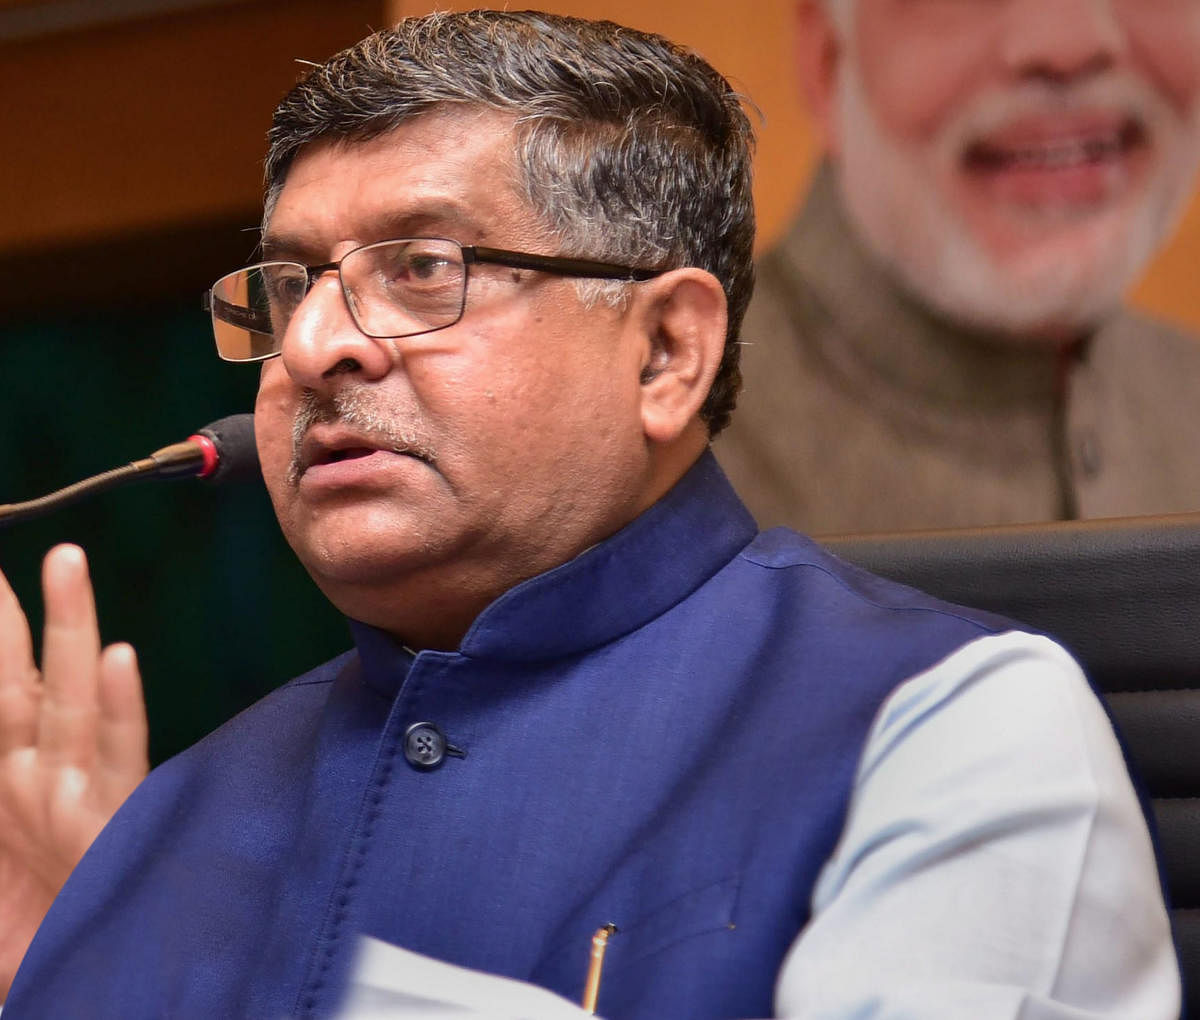 Data sovereignty must not be compromised: Prasad